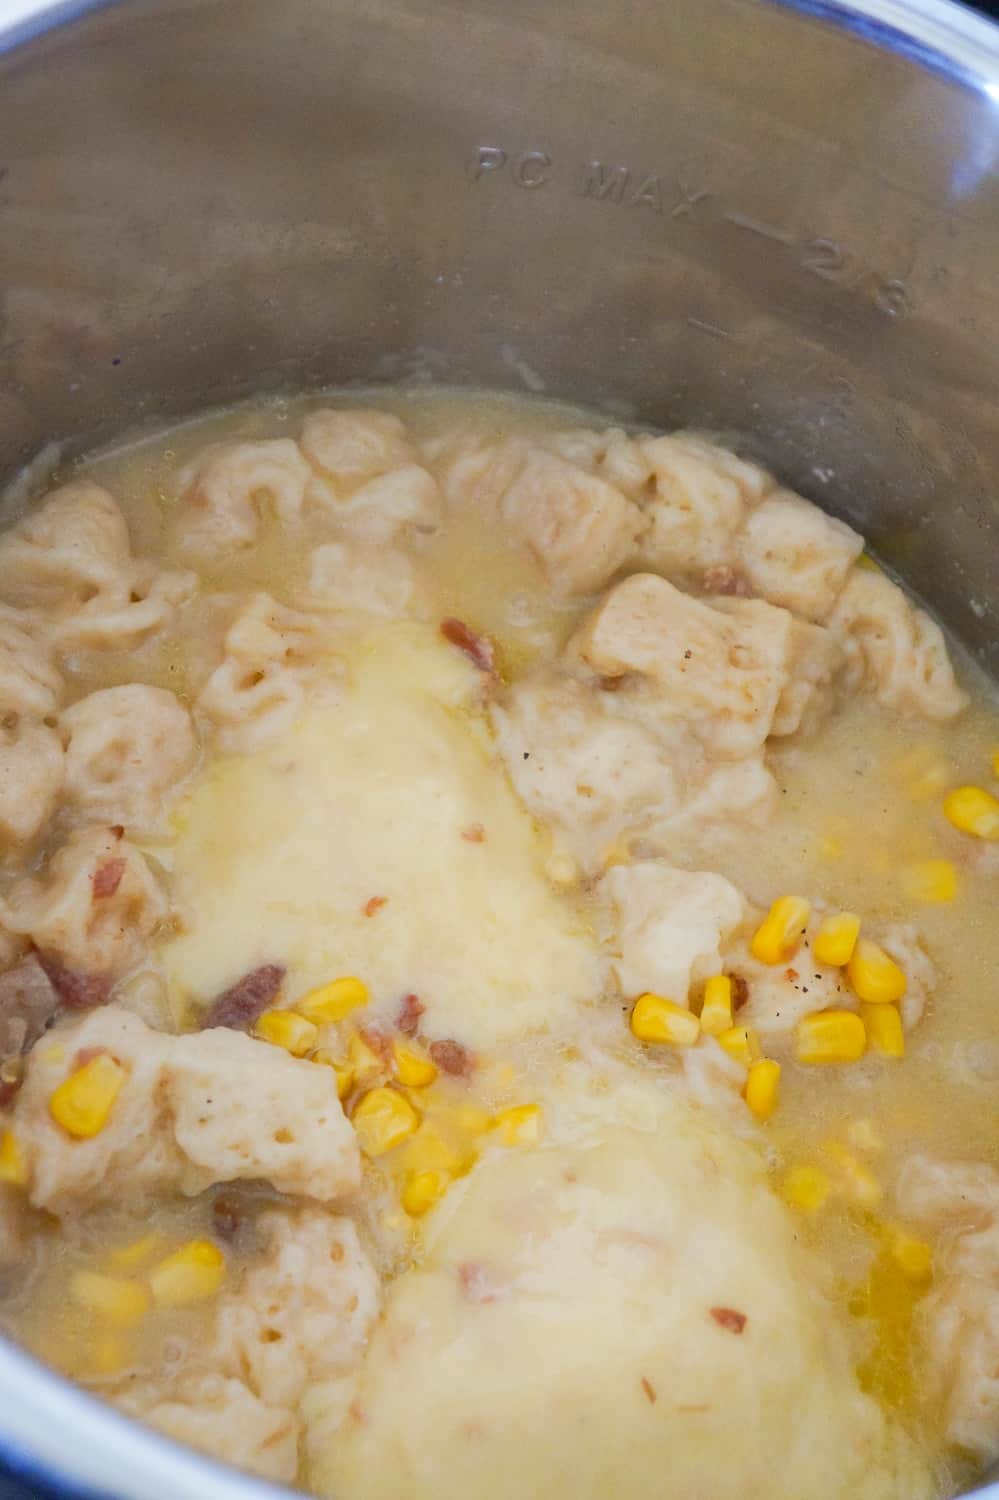 Instant Pot chicken and dumplings after cooking